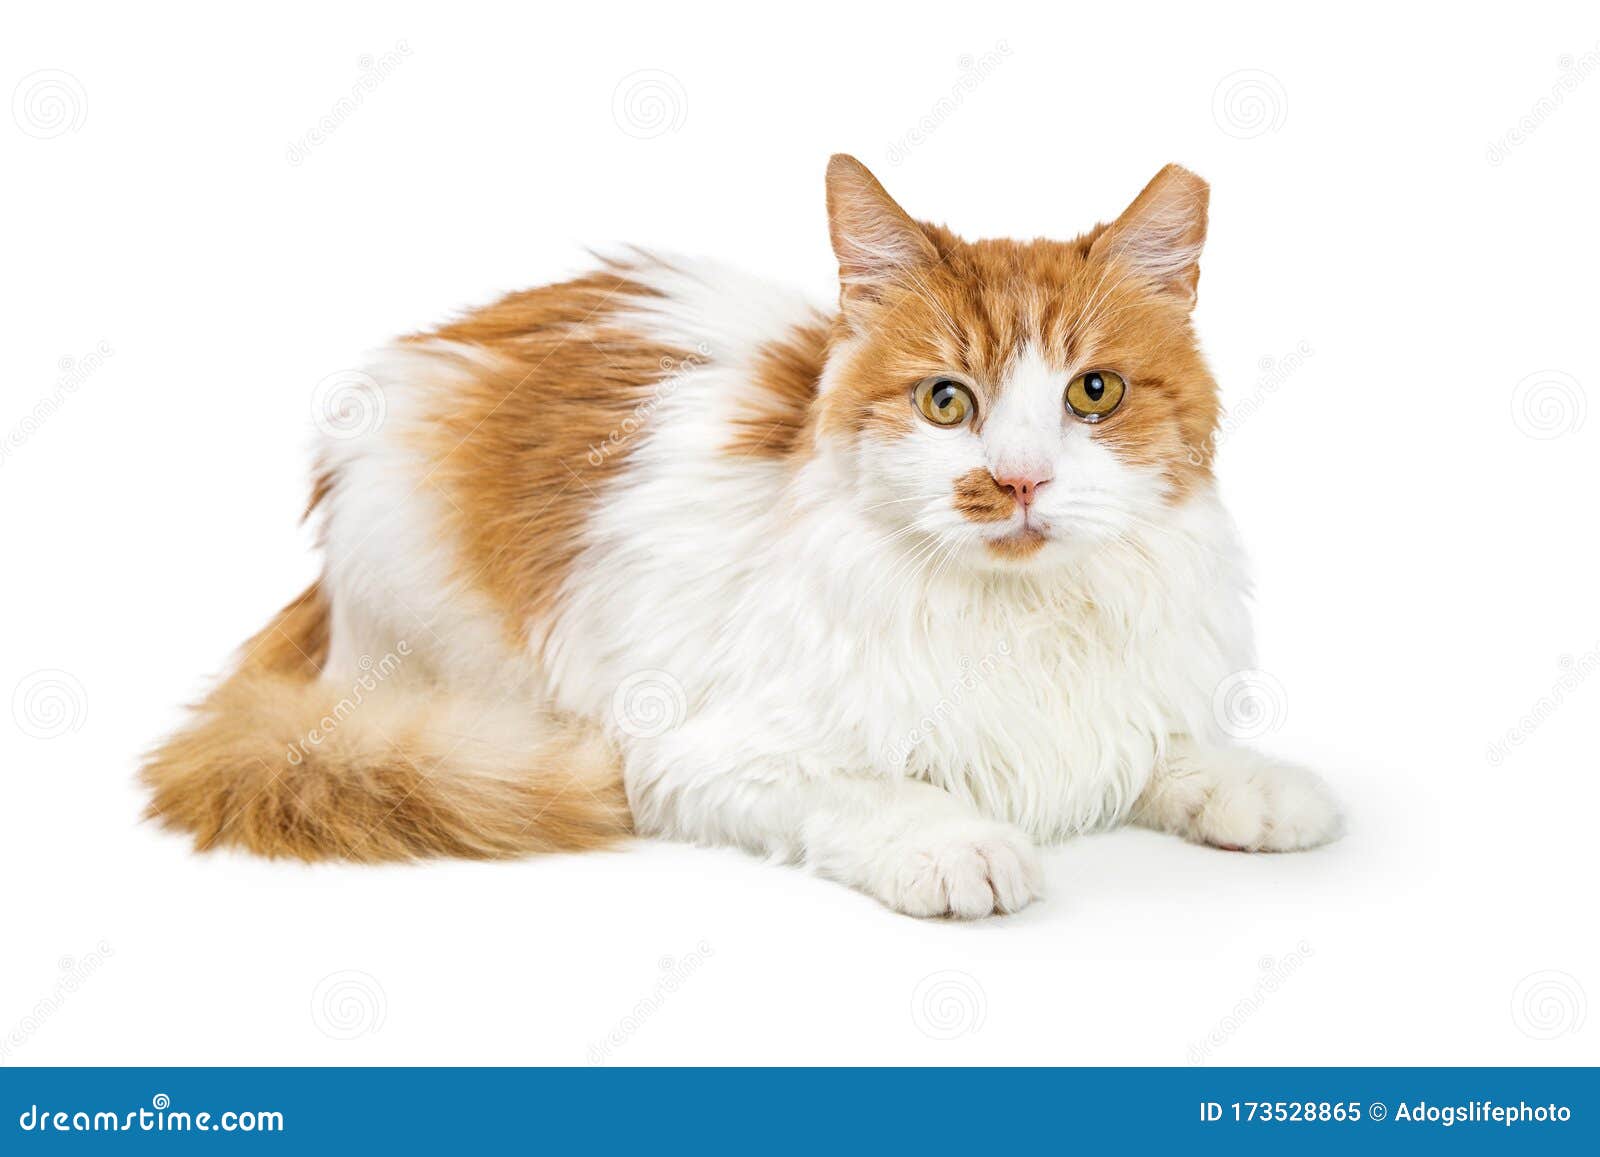 Orange and White Cat Lying Looking at Camera Stock Image - Image of  looking, sleep: 173528865